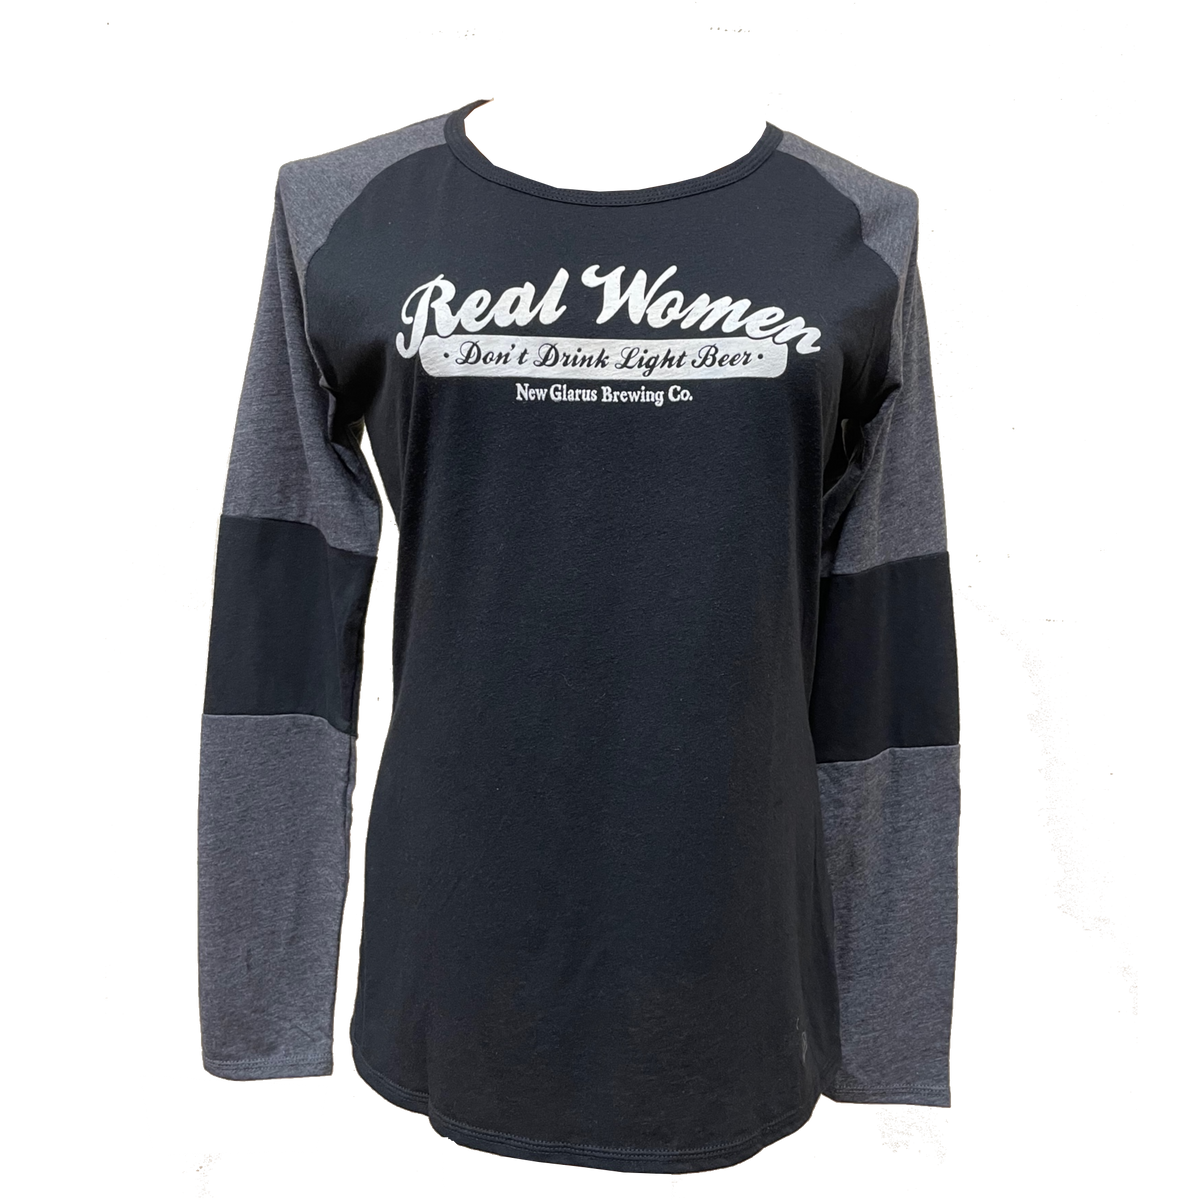 Long sleeve black baseball t-shirt with grey sleeves and Real Women Don&#39;t Drink Light Beer, New Glarus Brewing Co. in white on the front.